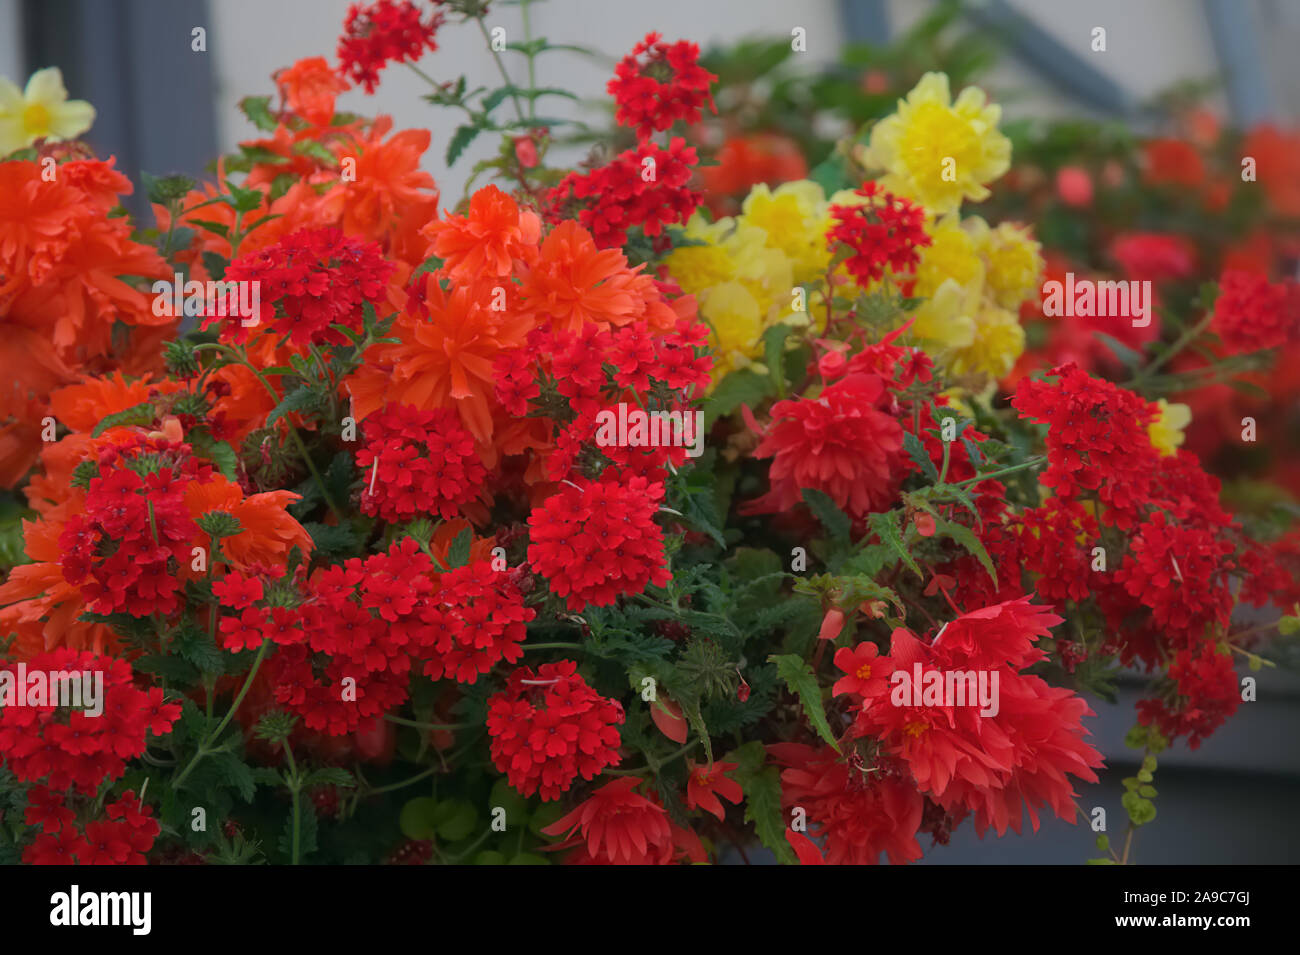 Summer hanging baskets in red and yellow using Verbena and Begonia Stock Photo